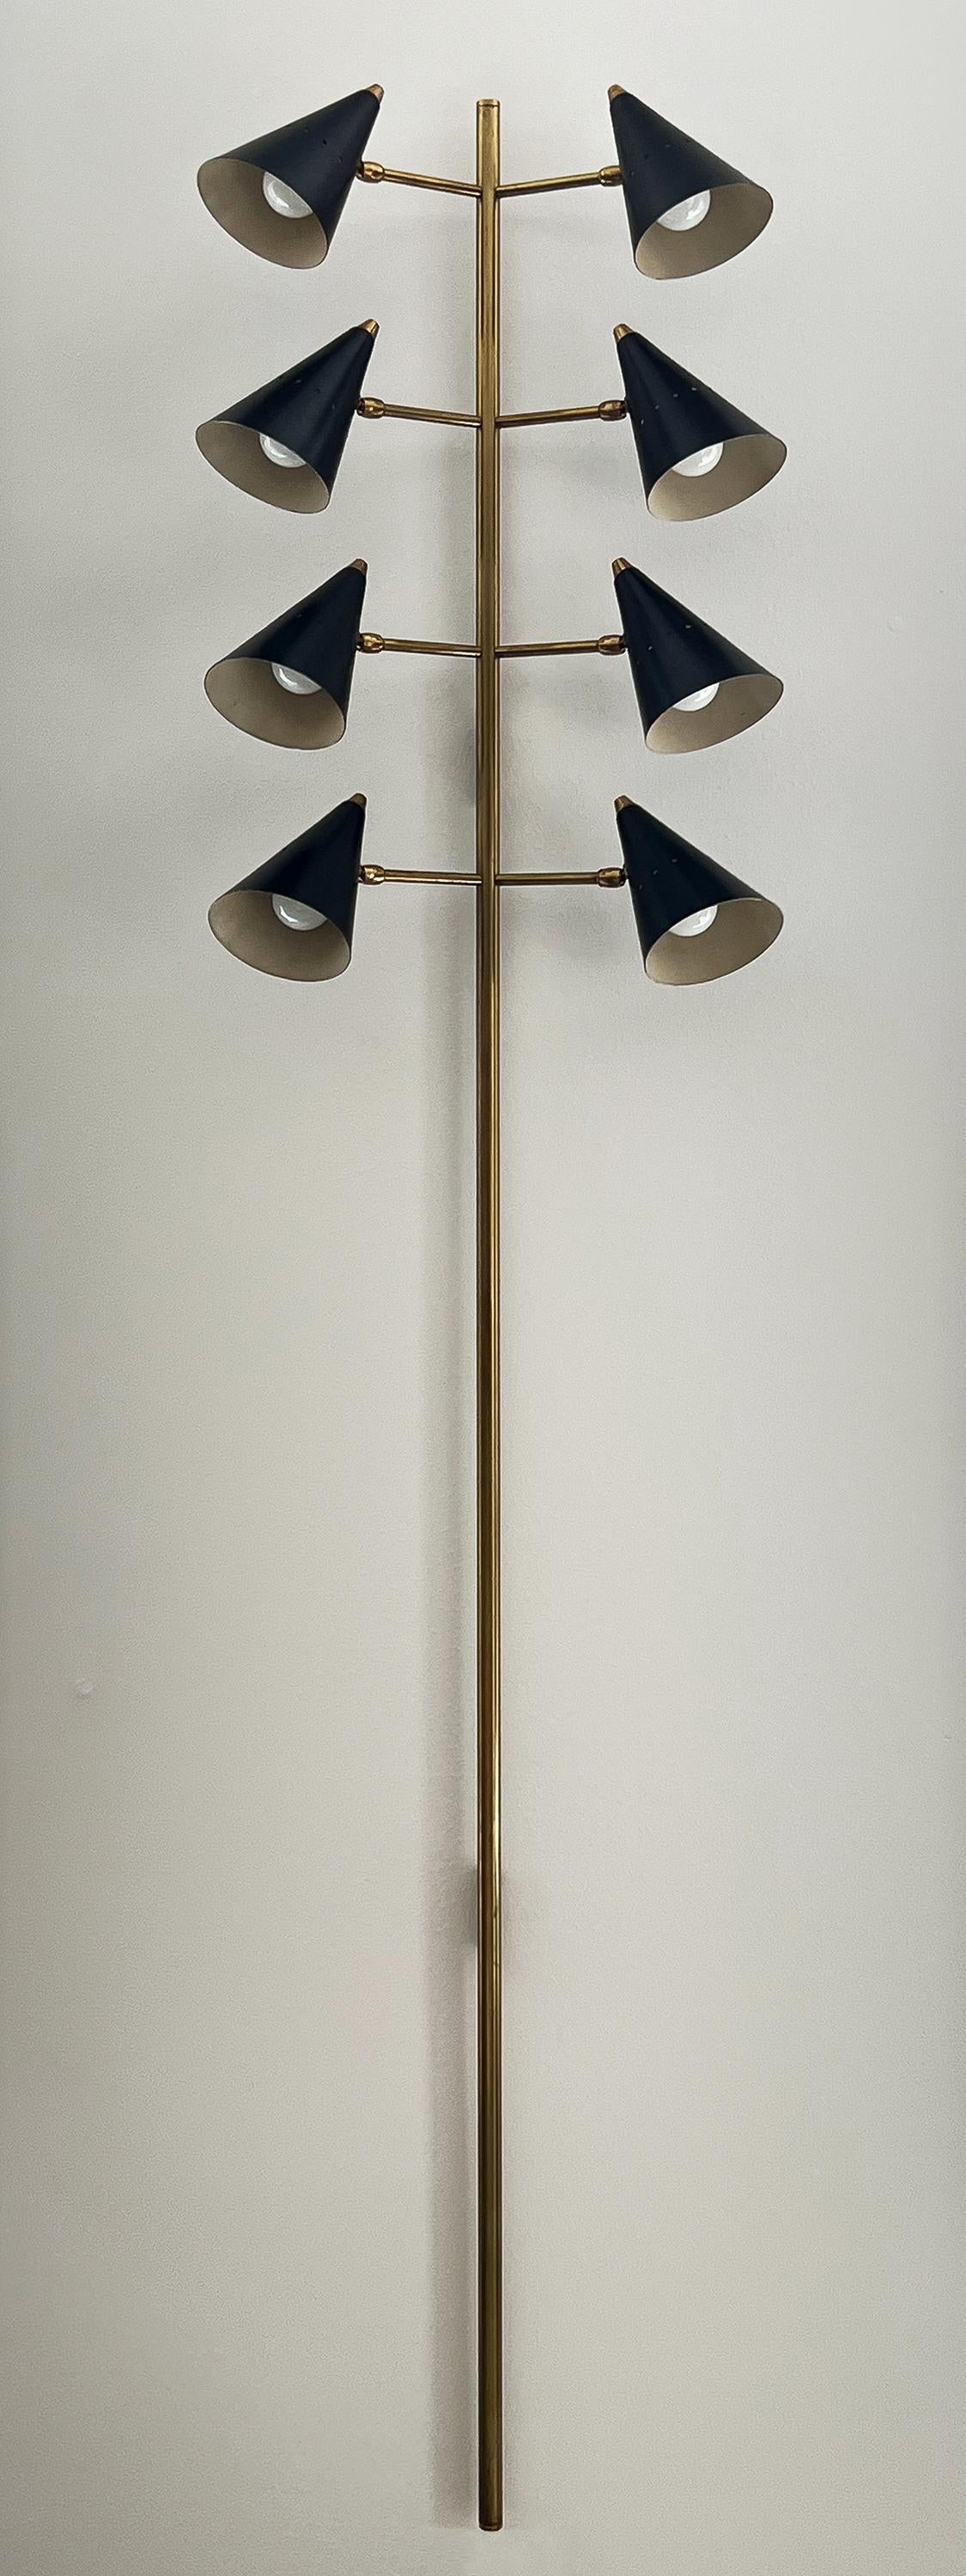 Lacquered Rare Pair of Stilnovo Monumental Eight Light Wall Sconces